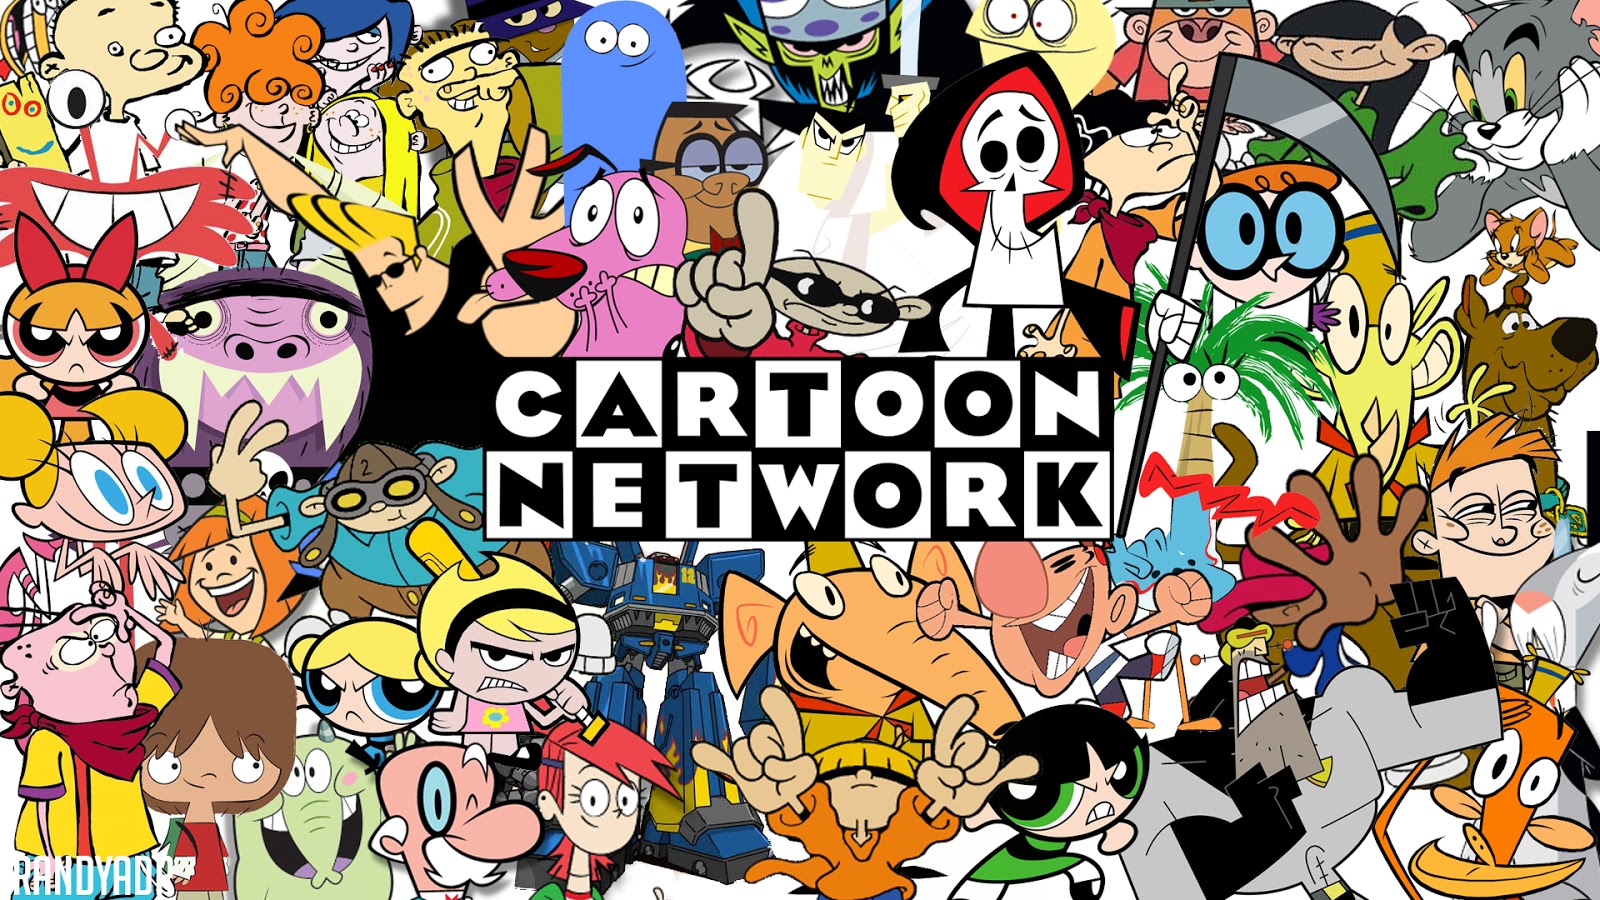 Favorite Cartoon Network show(s) from the 2000s? - Hollywood - OneHallyu